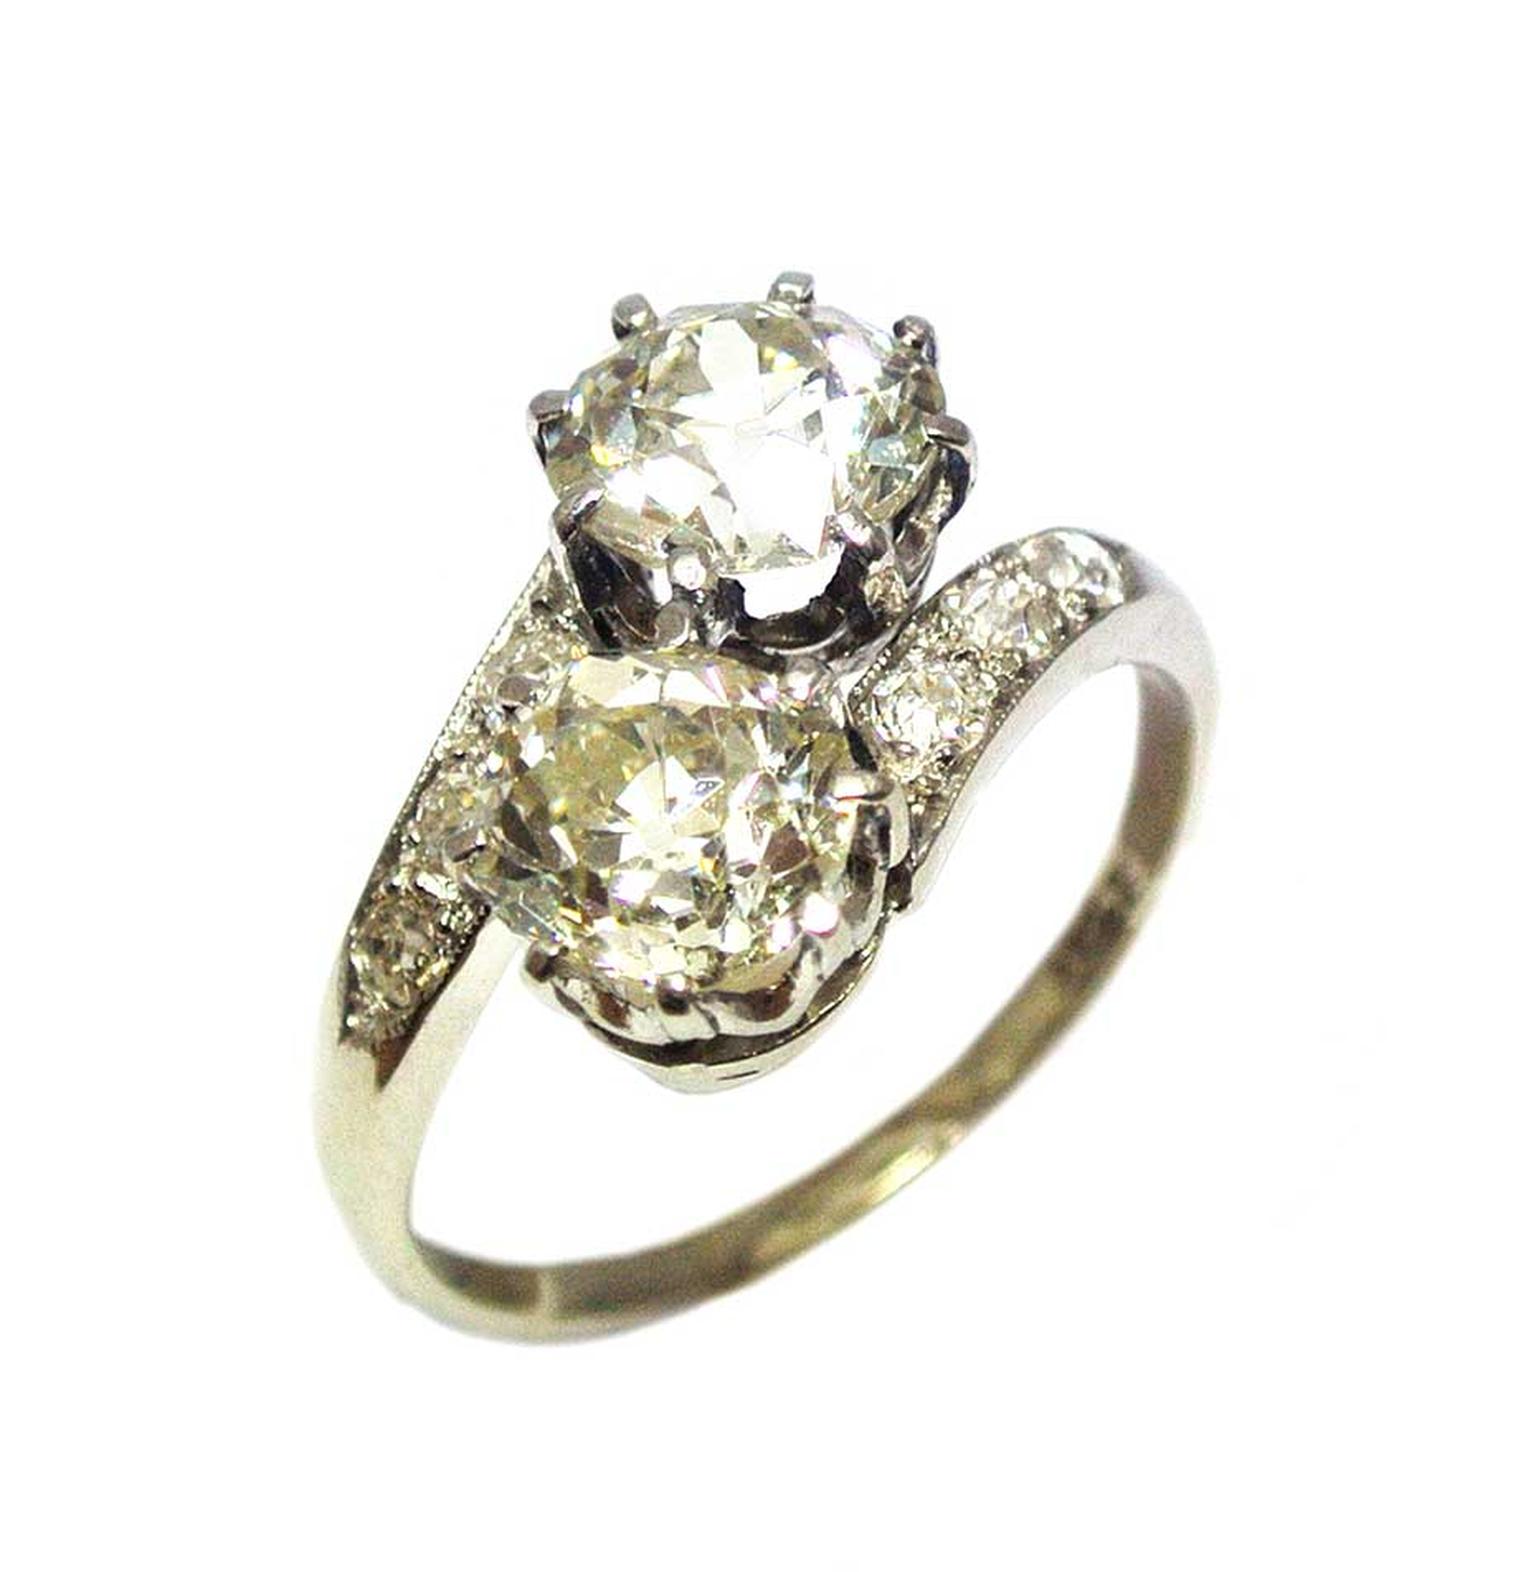 Crossover design vintage diamond engagement ring set with 1.3ct and 1.2ct diamonds, circa 1910. Available at Grays Antique Market, London.